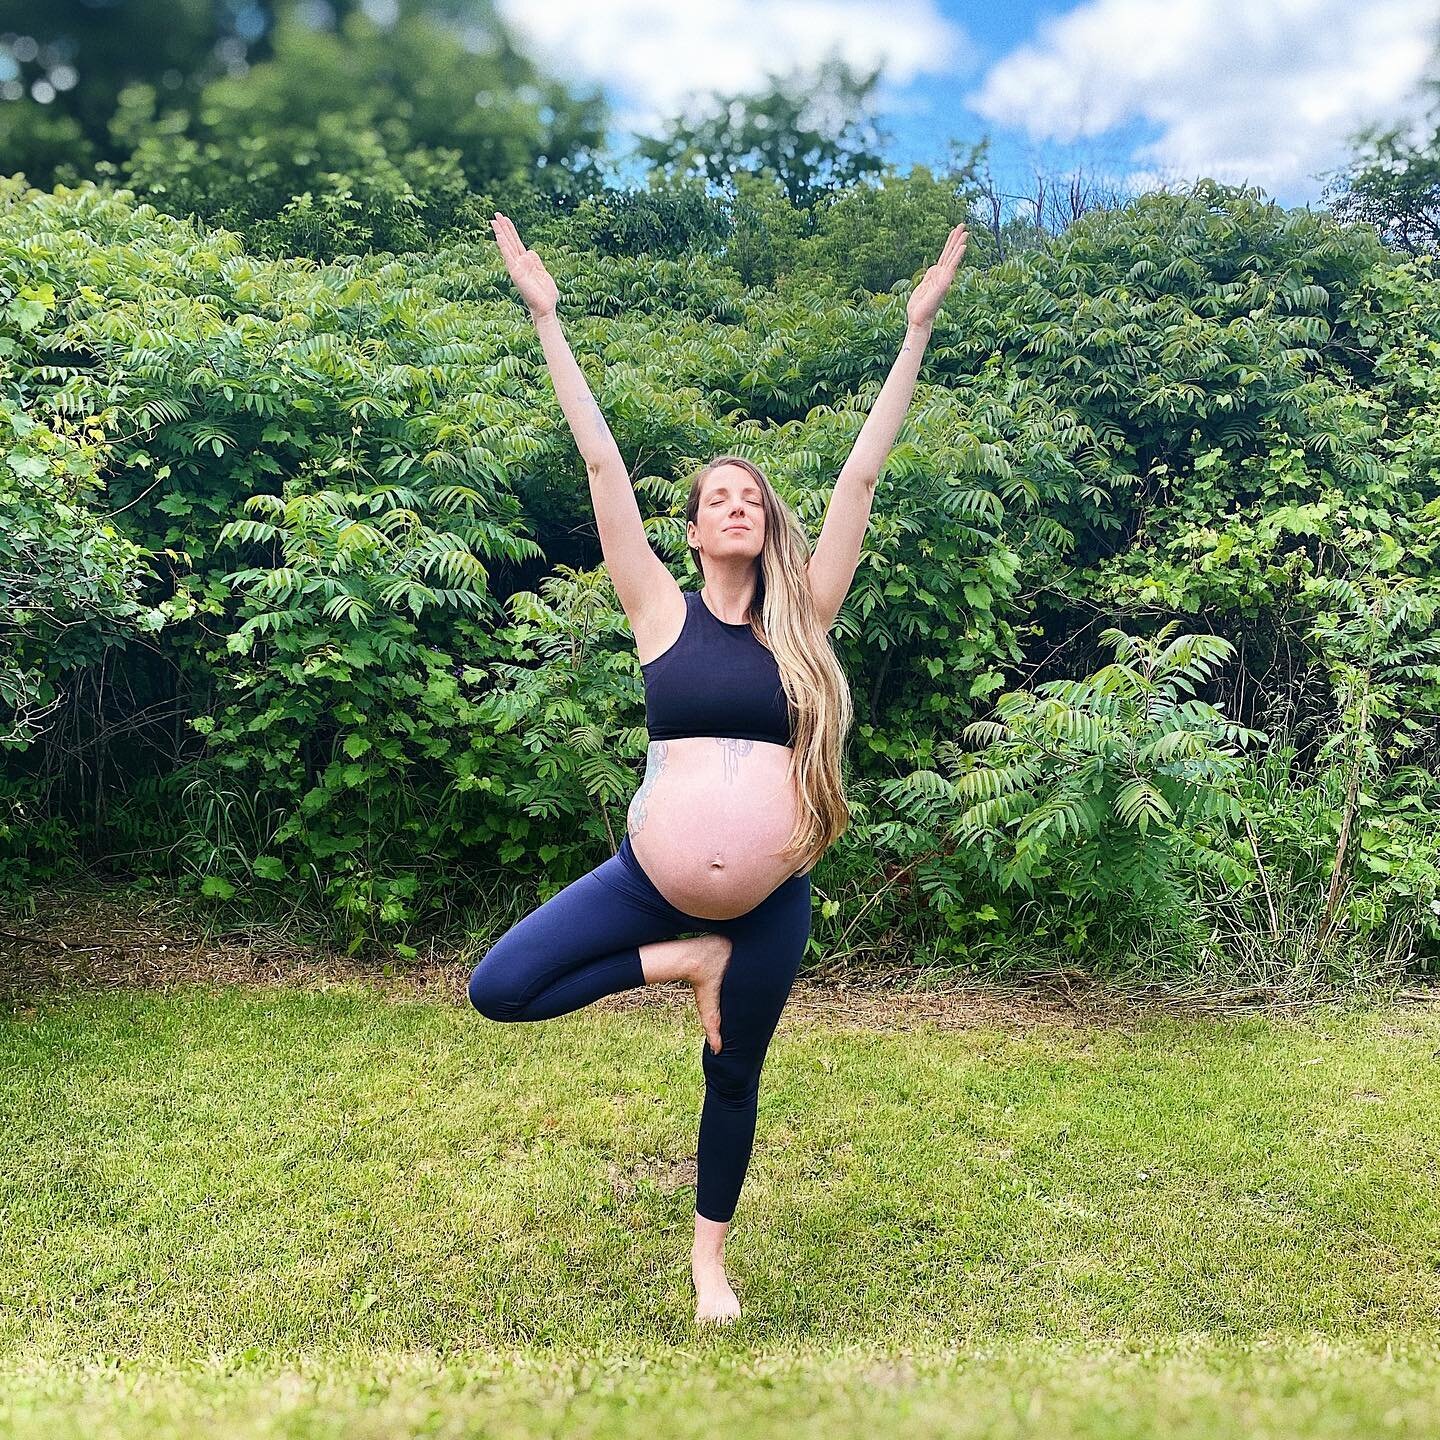 A letter from my pregnant body to my postpartum body-

This body is Magic✨

This body is creating a life. 

A life&hellip;

What is more magical than that?

And when that life is earth-side

I wont rush the healing

I wont judge or question the chang